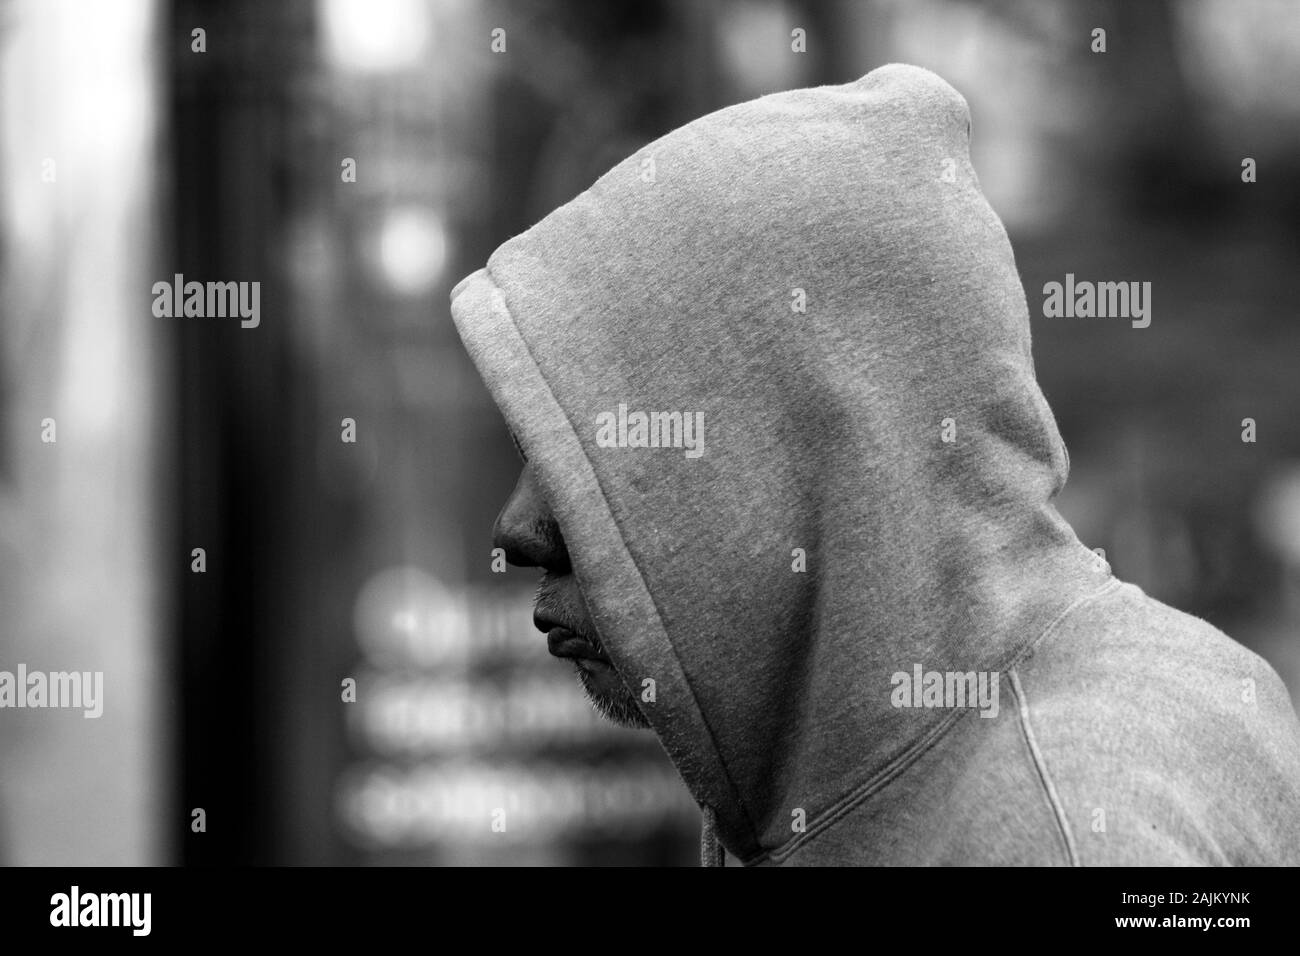 Man wearing a hoodie with hood pulled up Stock Photo